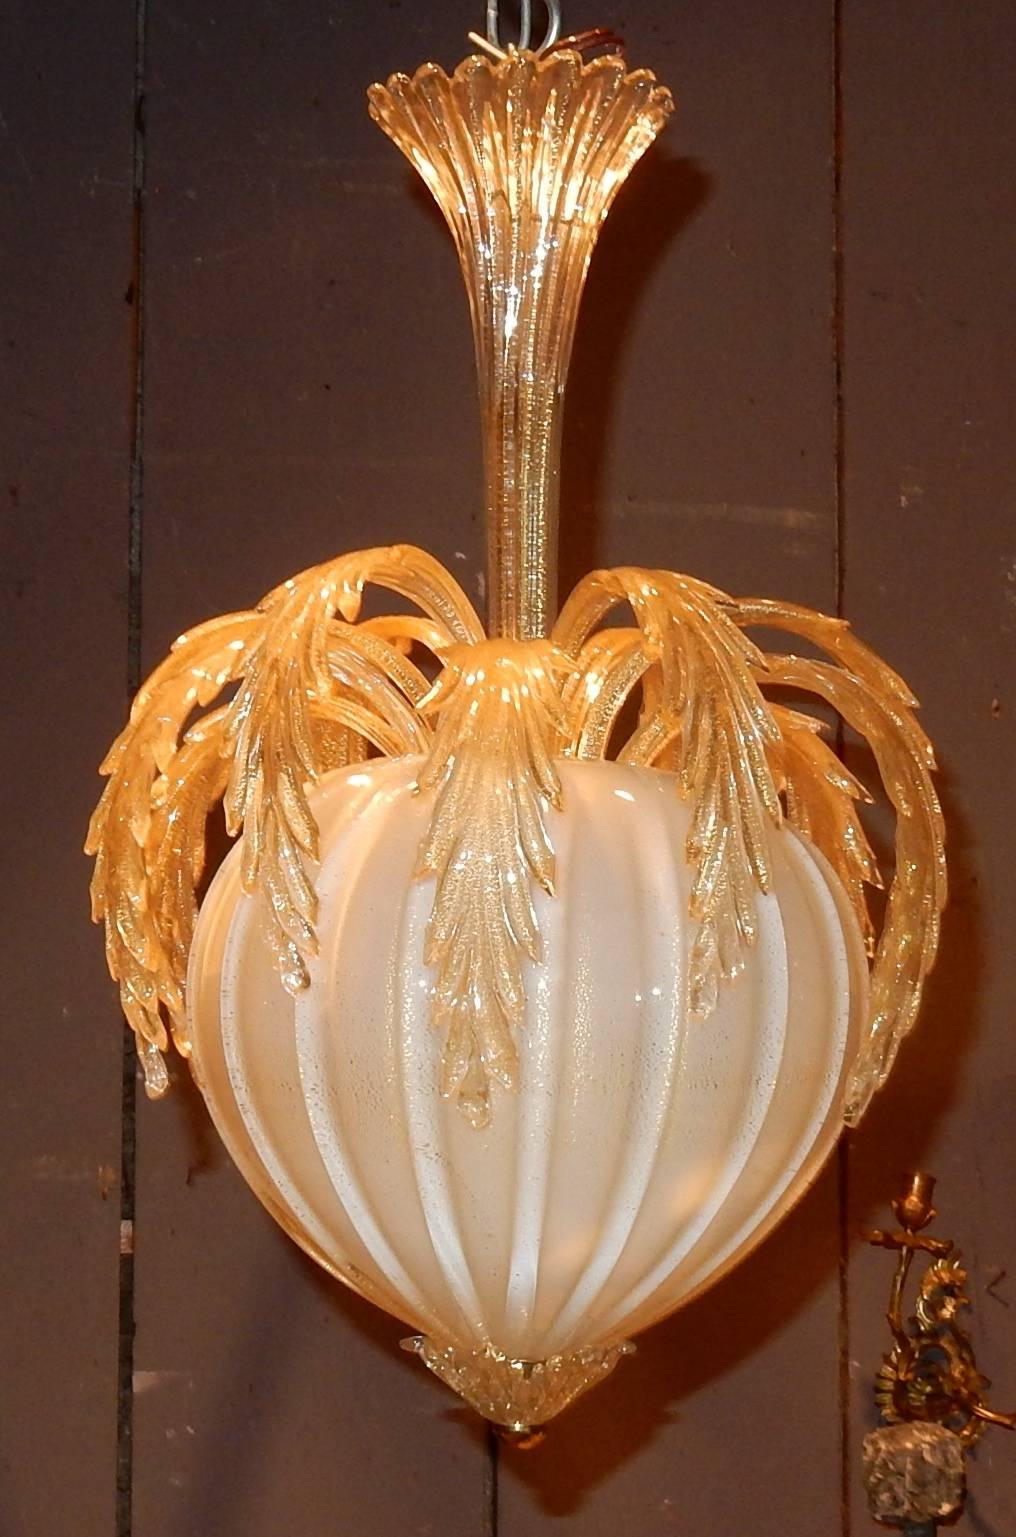 Chandelier crystal with inclusion of gold good condition, circa 1950-1970, 12 leaves down.